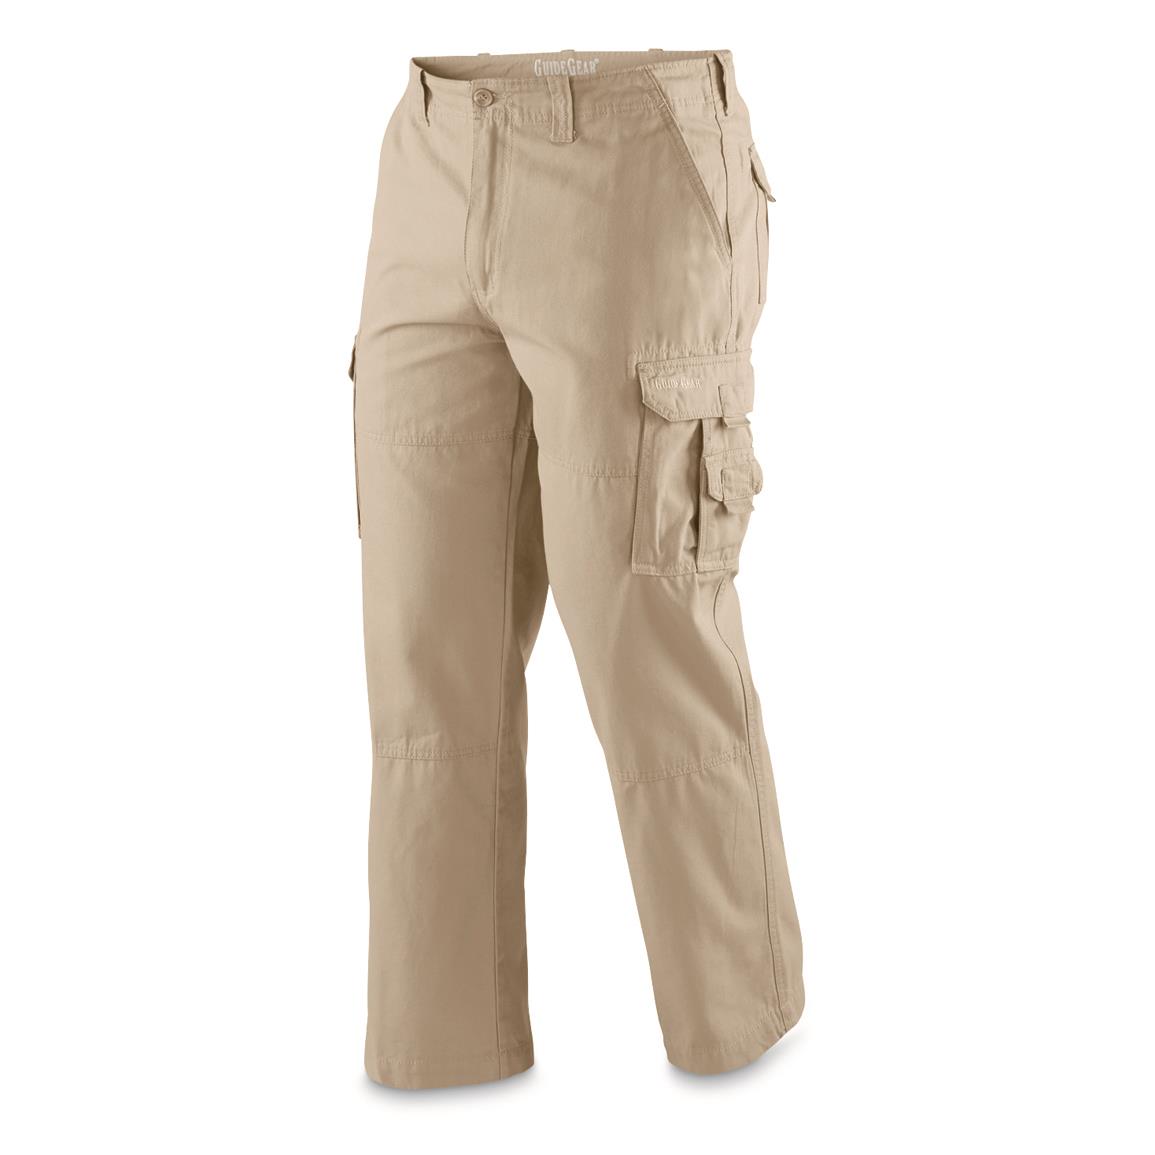 Guide Gear Men's Outdoor Cargo Pants - 677832, Jeans & Pants at ...